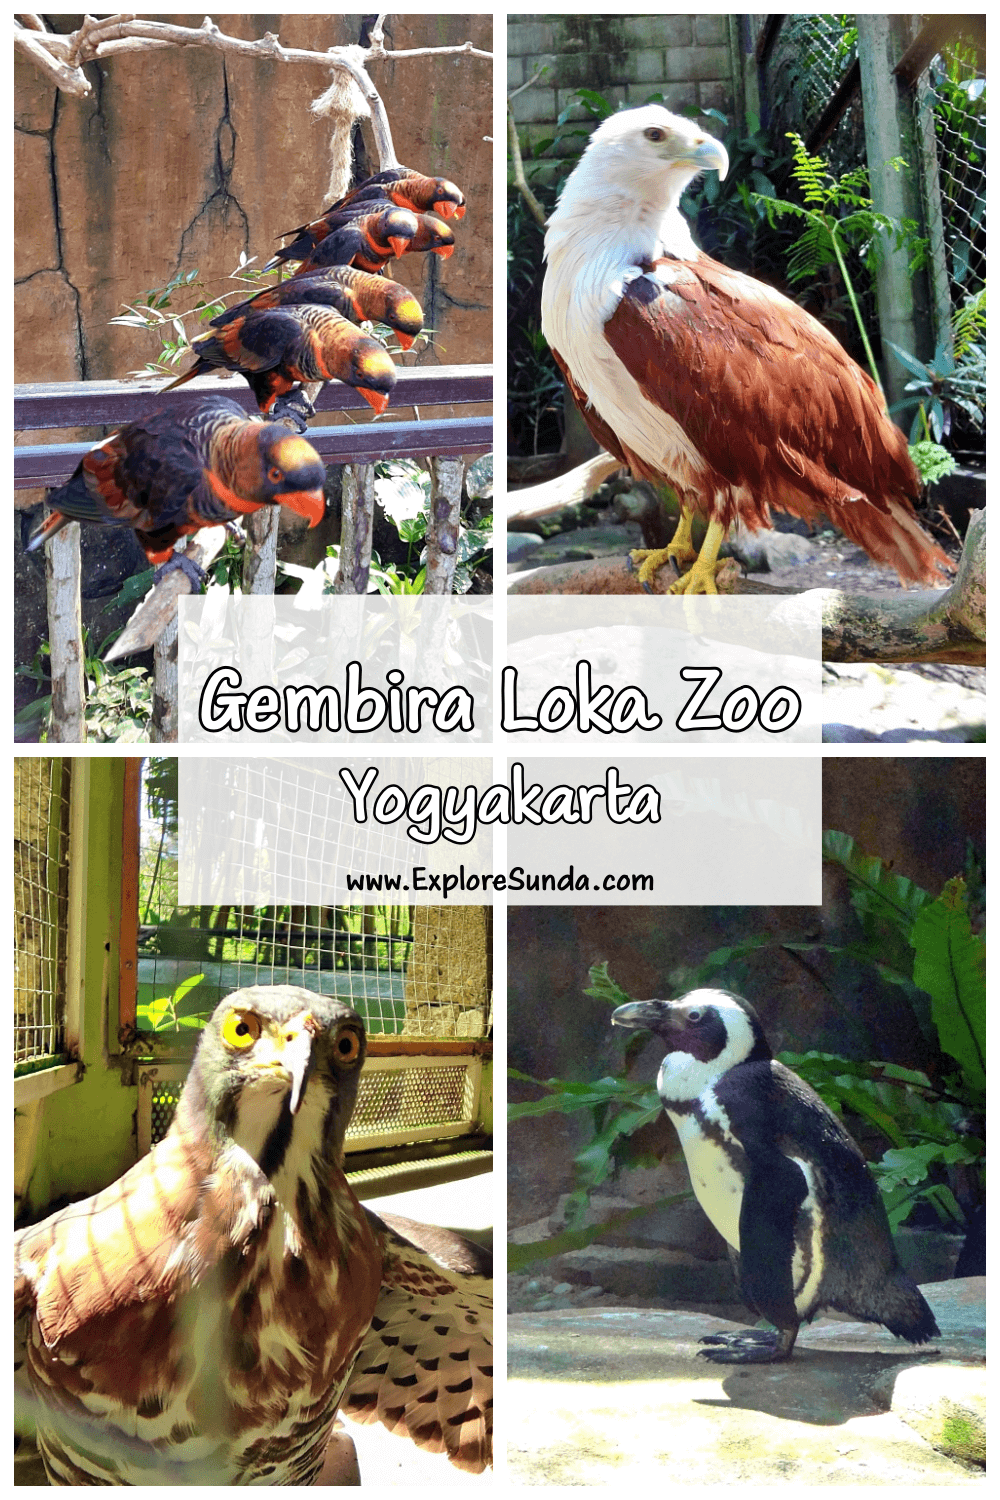 Bring your family to explore Gembira Loka Zoo in Yogyakarta and see aldabra the giant tortoise, jackass penguin, wallaby, tigers, elephants, and feed lory birds!